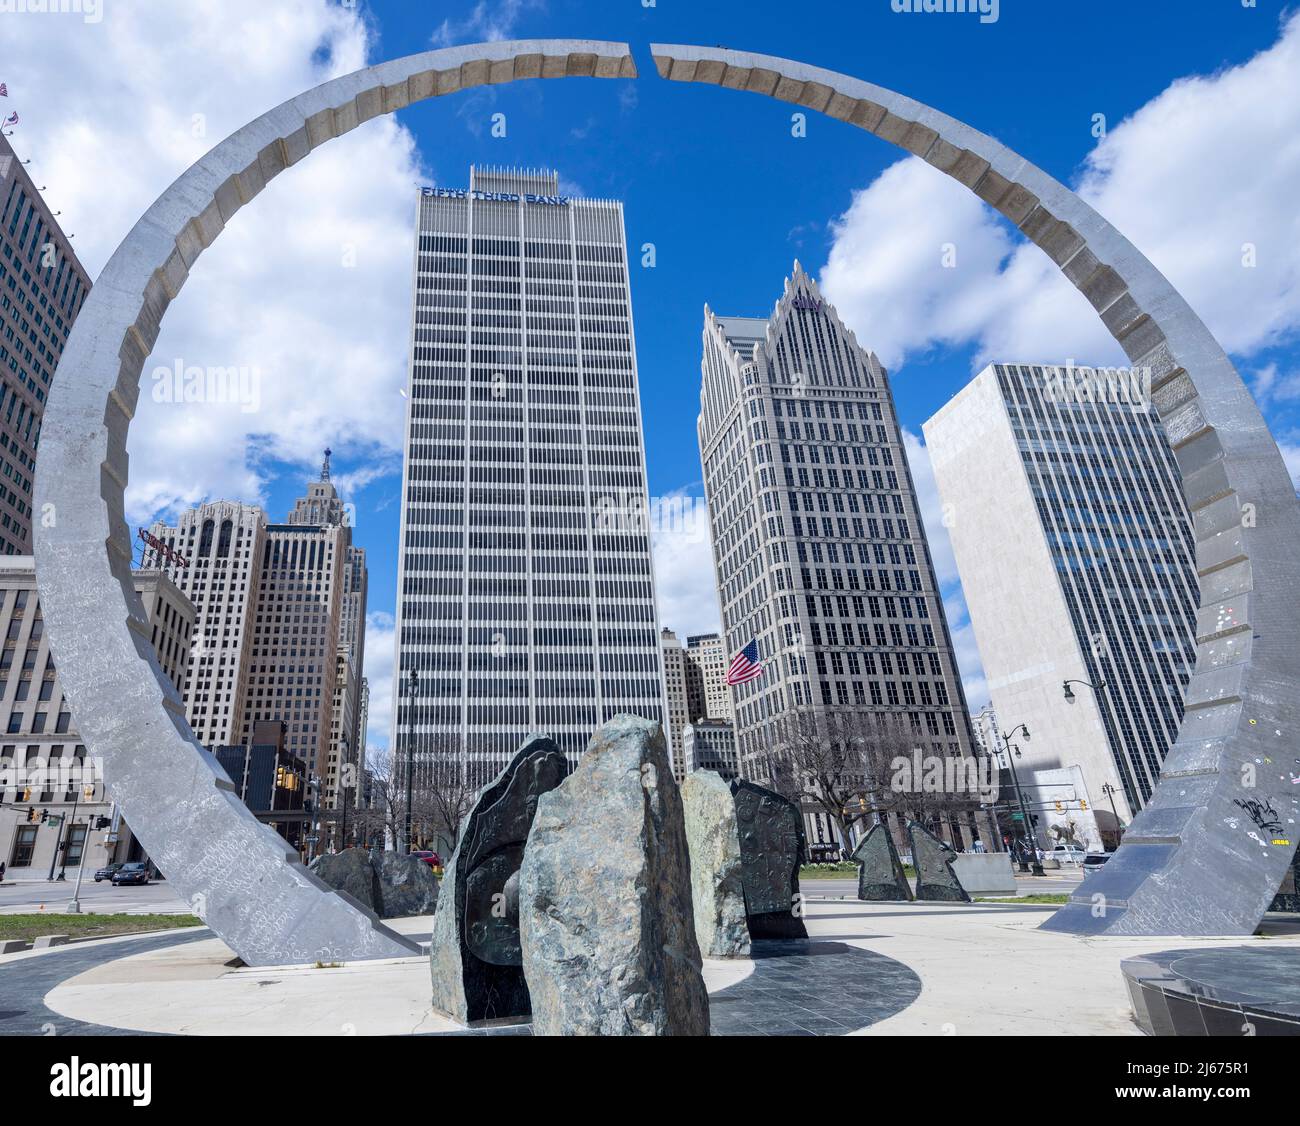 Transcending arch monument at the Philip A. Hart Plaza, downtown Detroit, Michigan, USA, with view of skyscrapers Stock Photo